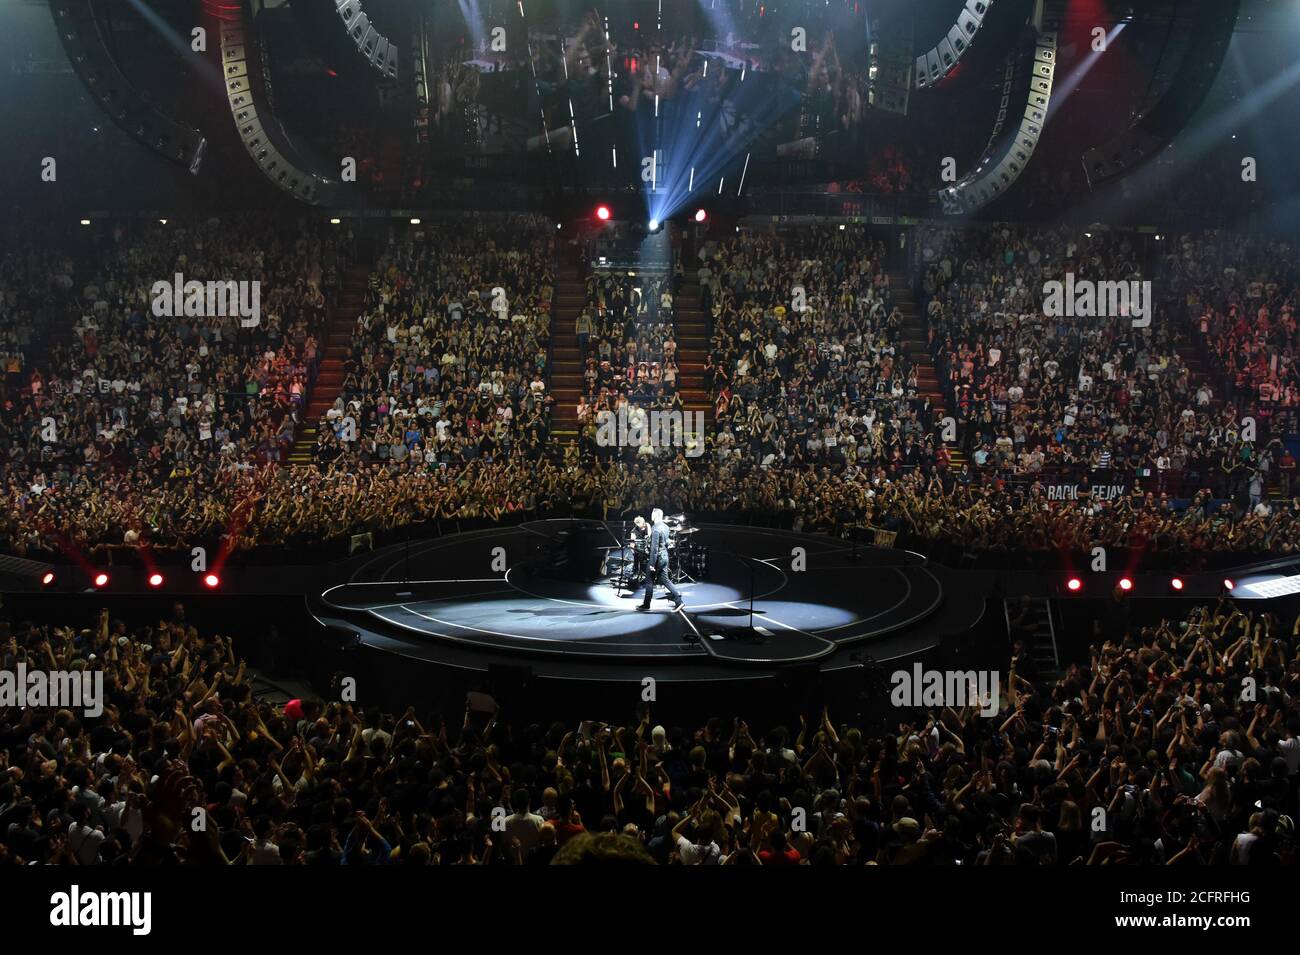 Milan Italy , 14/05/16 : Live concerto of the Muse at the Mediolanum Forum  Assago Stock Photo - Alamy